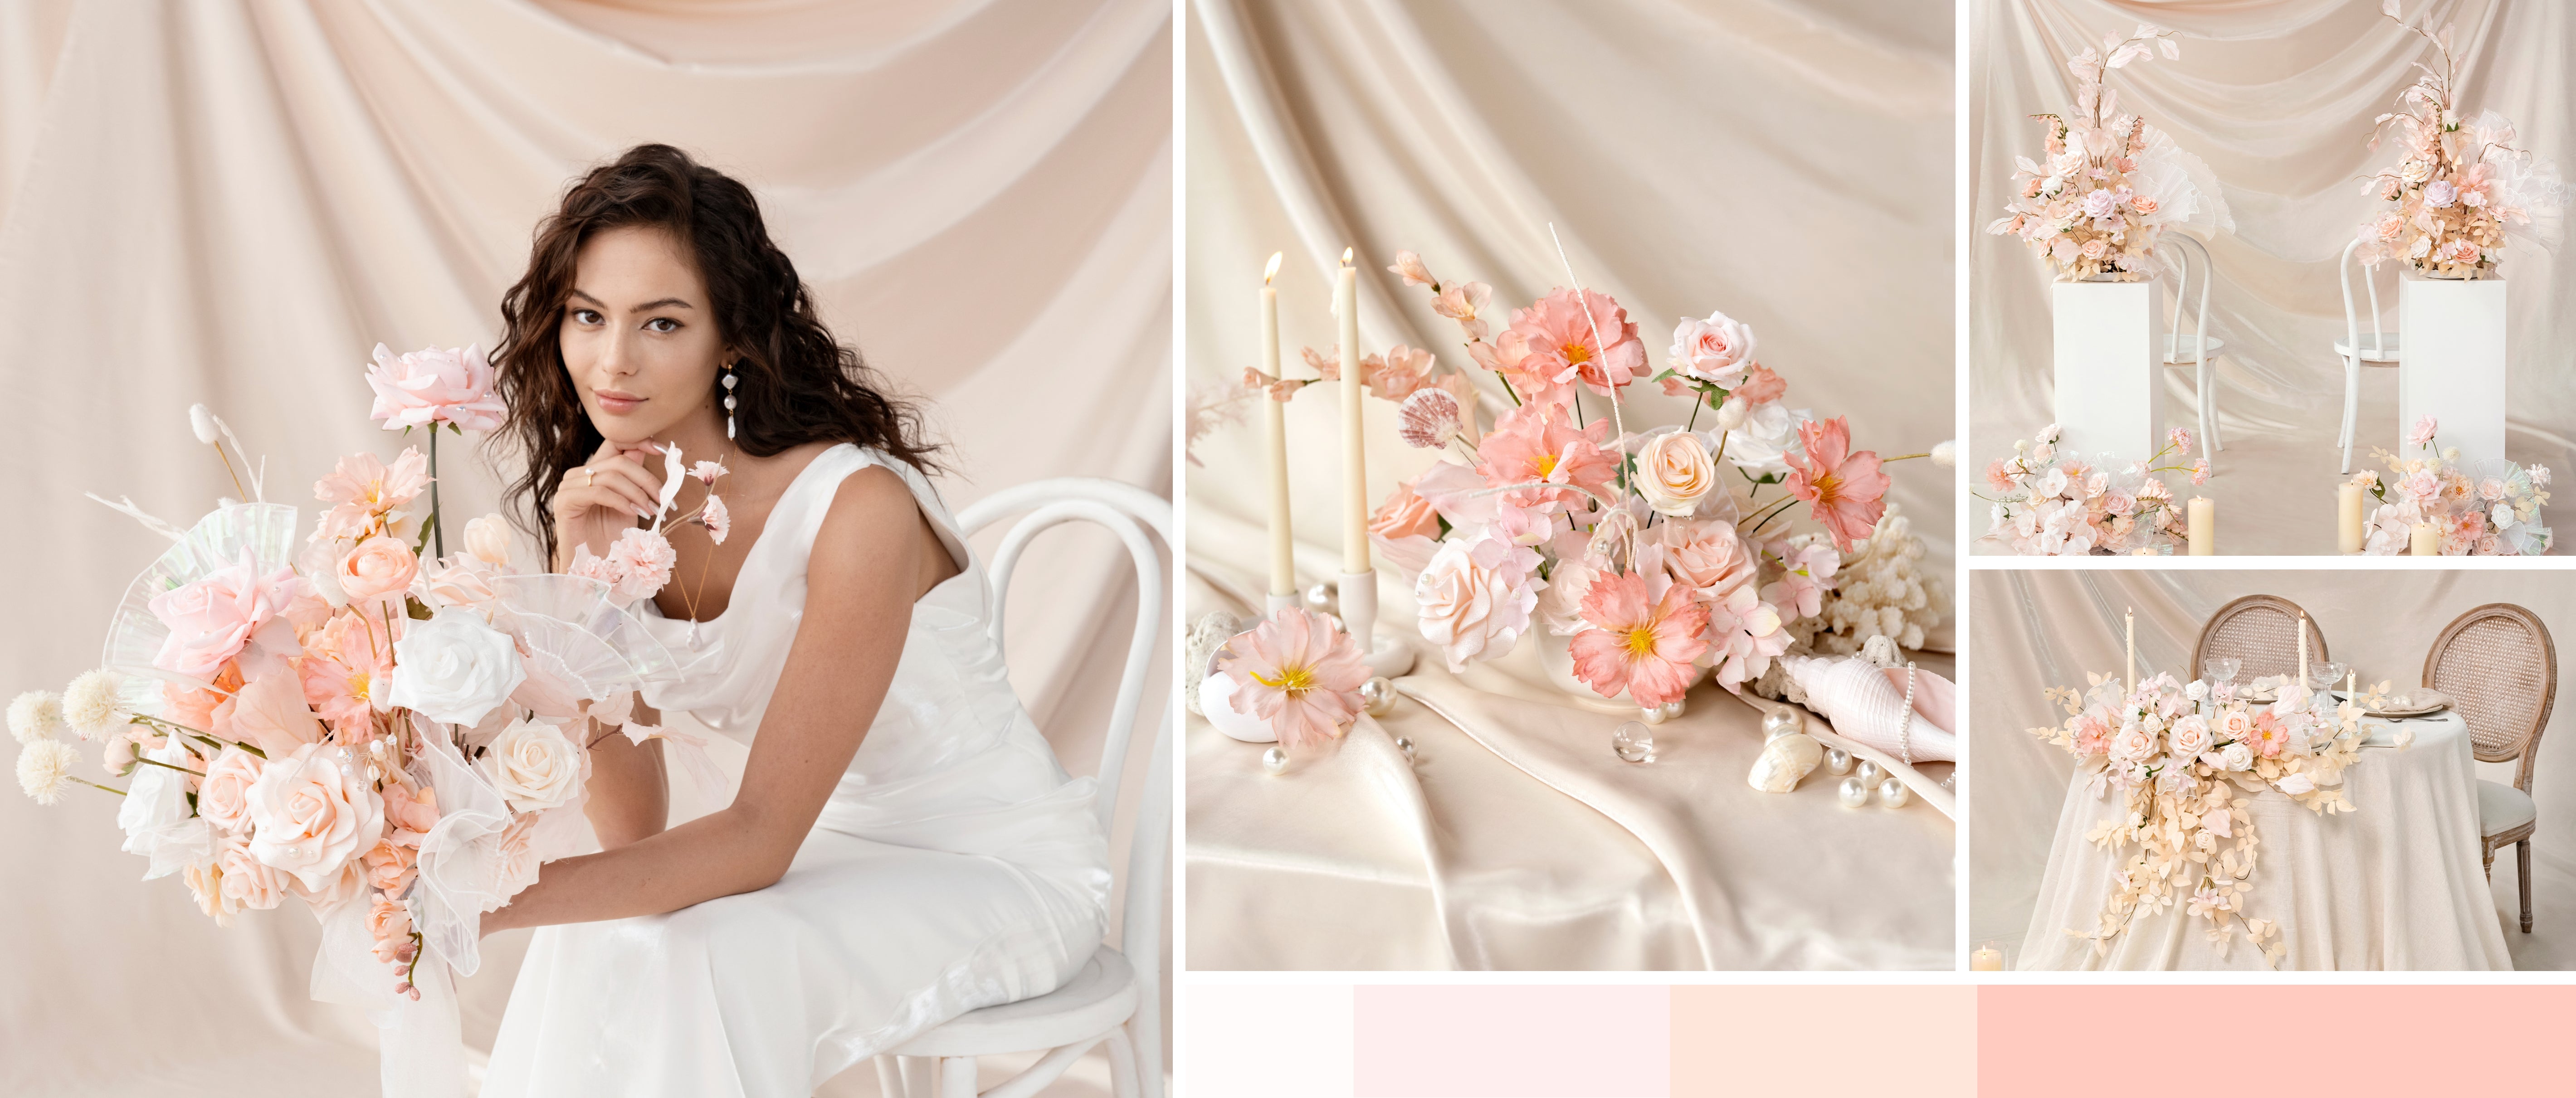 Blush & Pearl Sea Wedding Theme - Ling's Moment – Ling's Moment